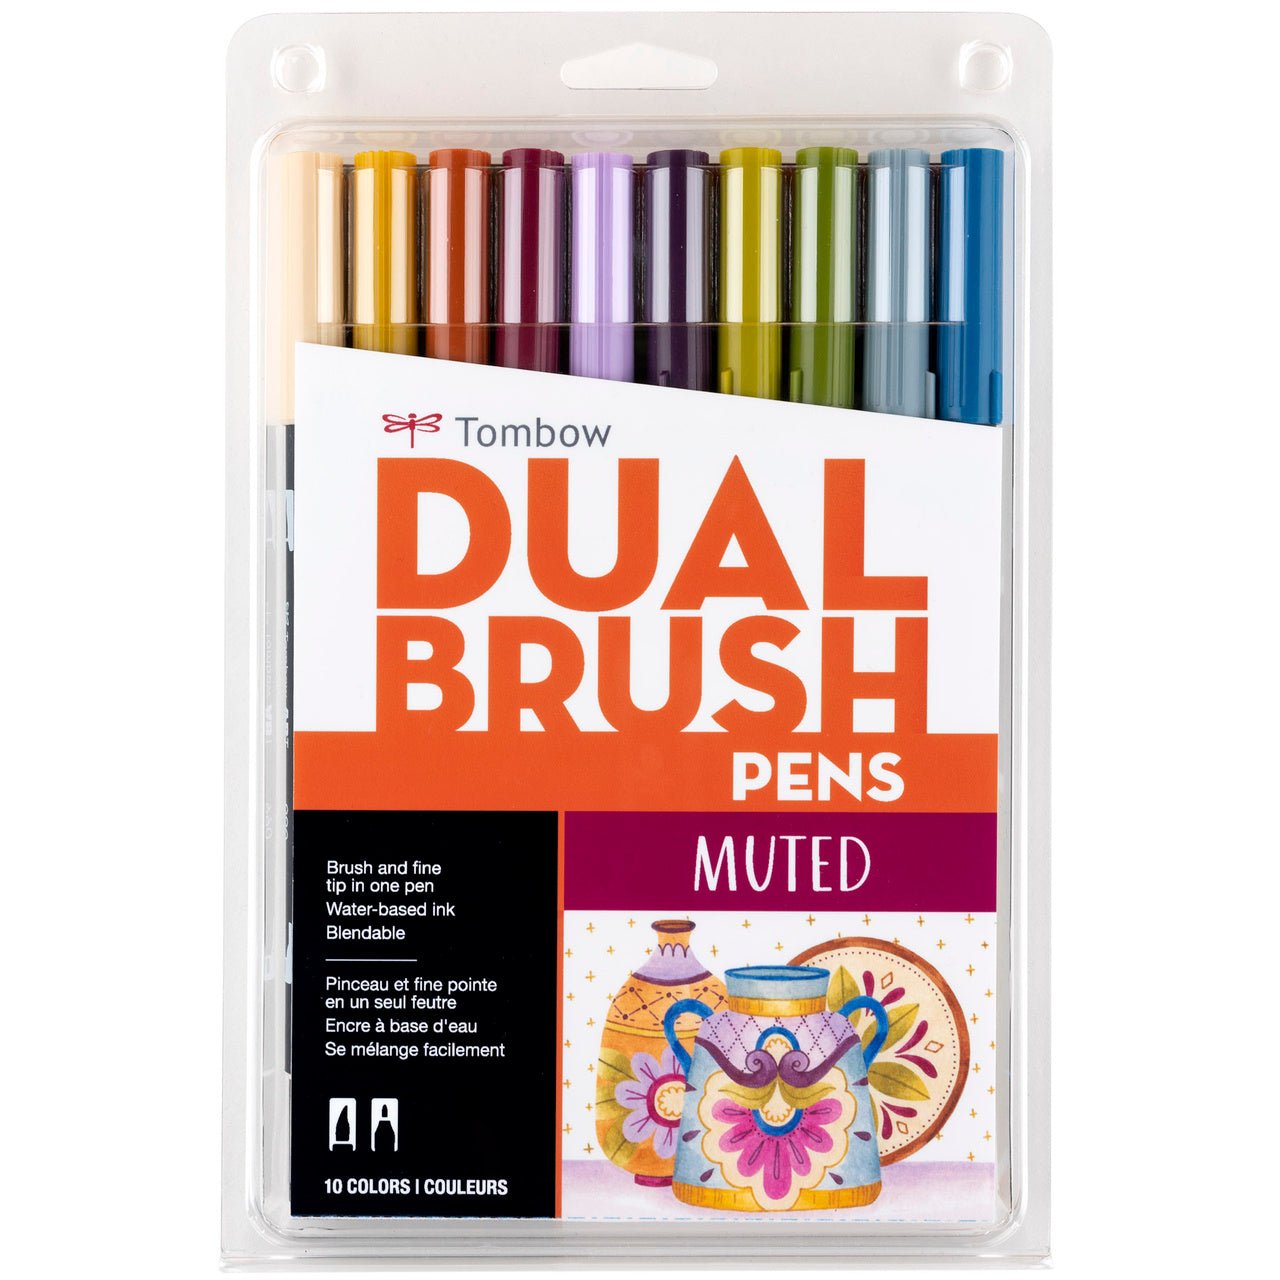 Tombow Dual Brush Marker Set of 10 - Muted Colors - merriartist.com